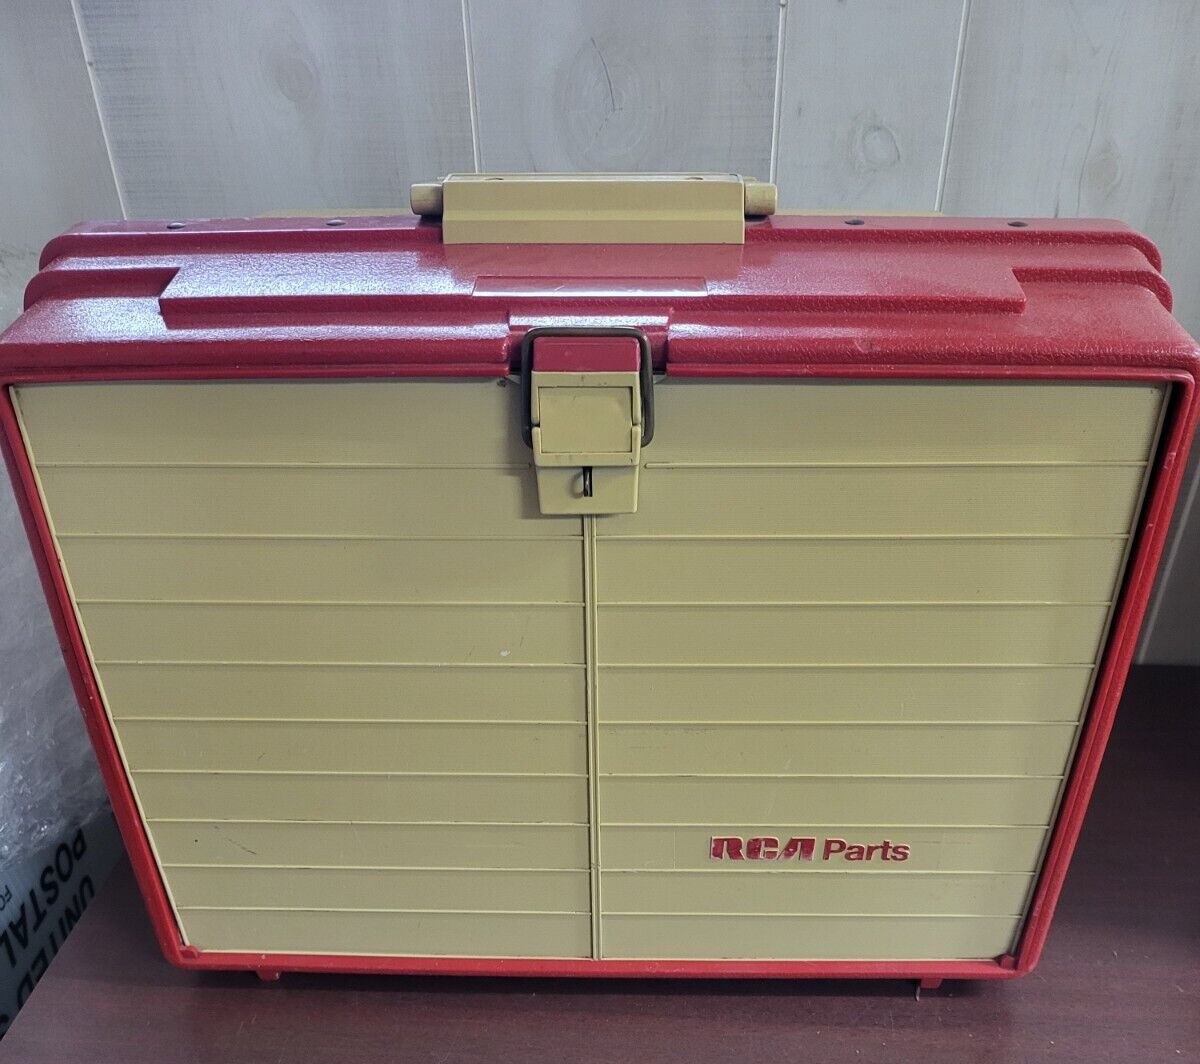 Vintage RCA Parts 5 Drawer Sidekick Carrying Case Toolbox 1981  1F6200 FULL